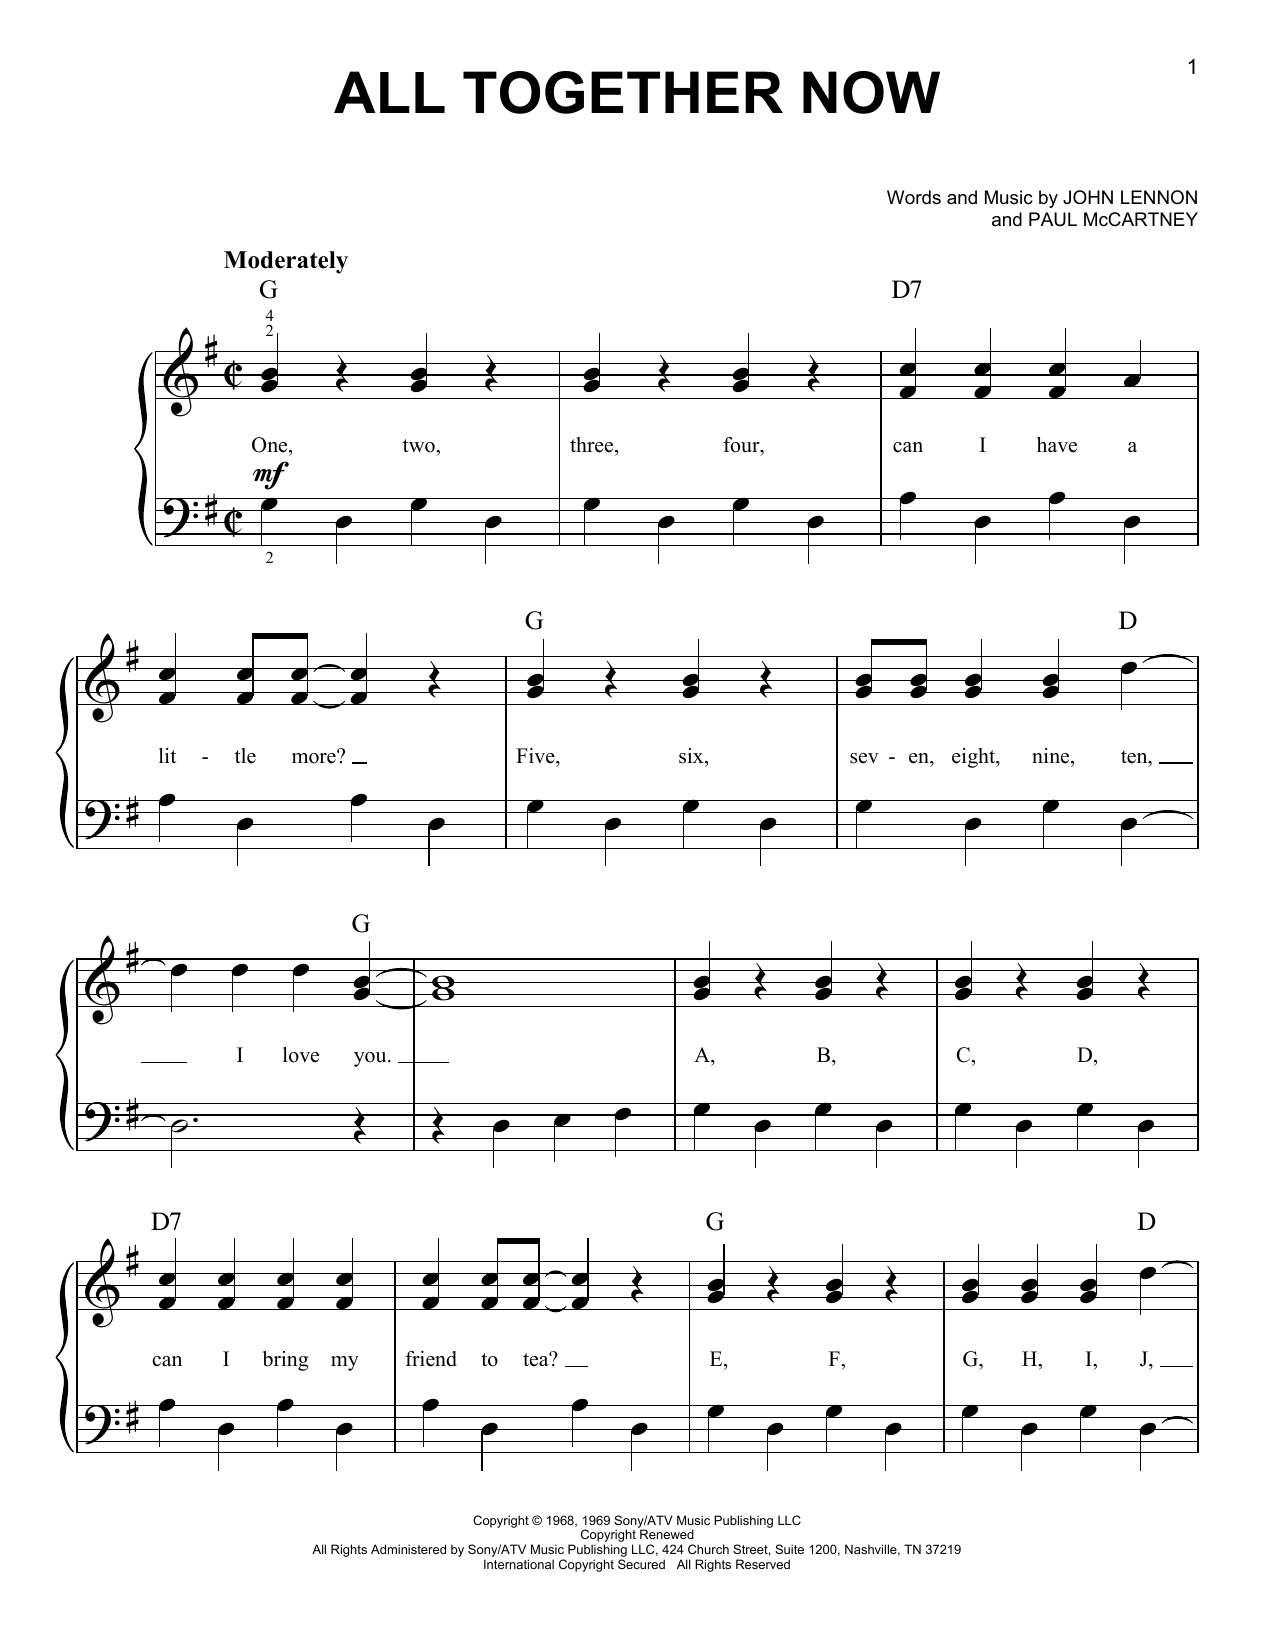 Download The Beatles All Together Now Sheet Music